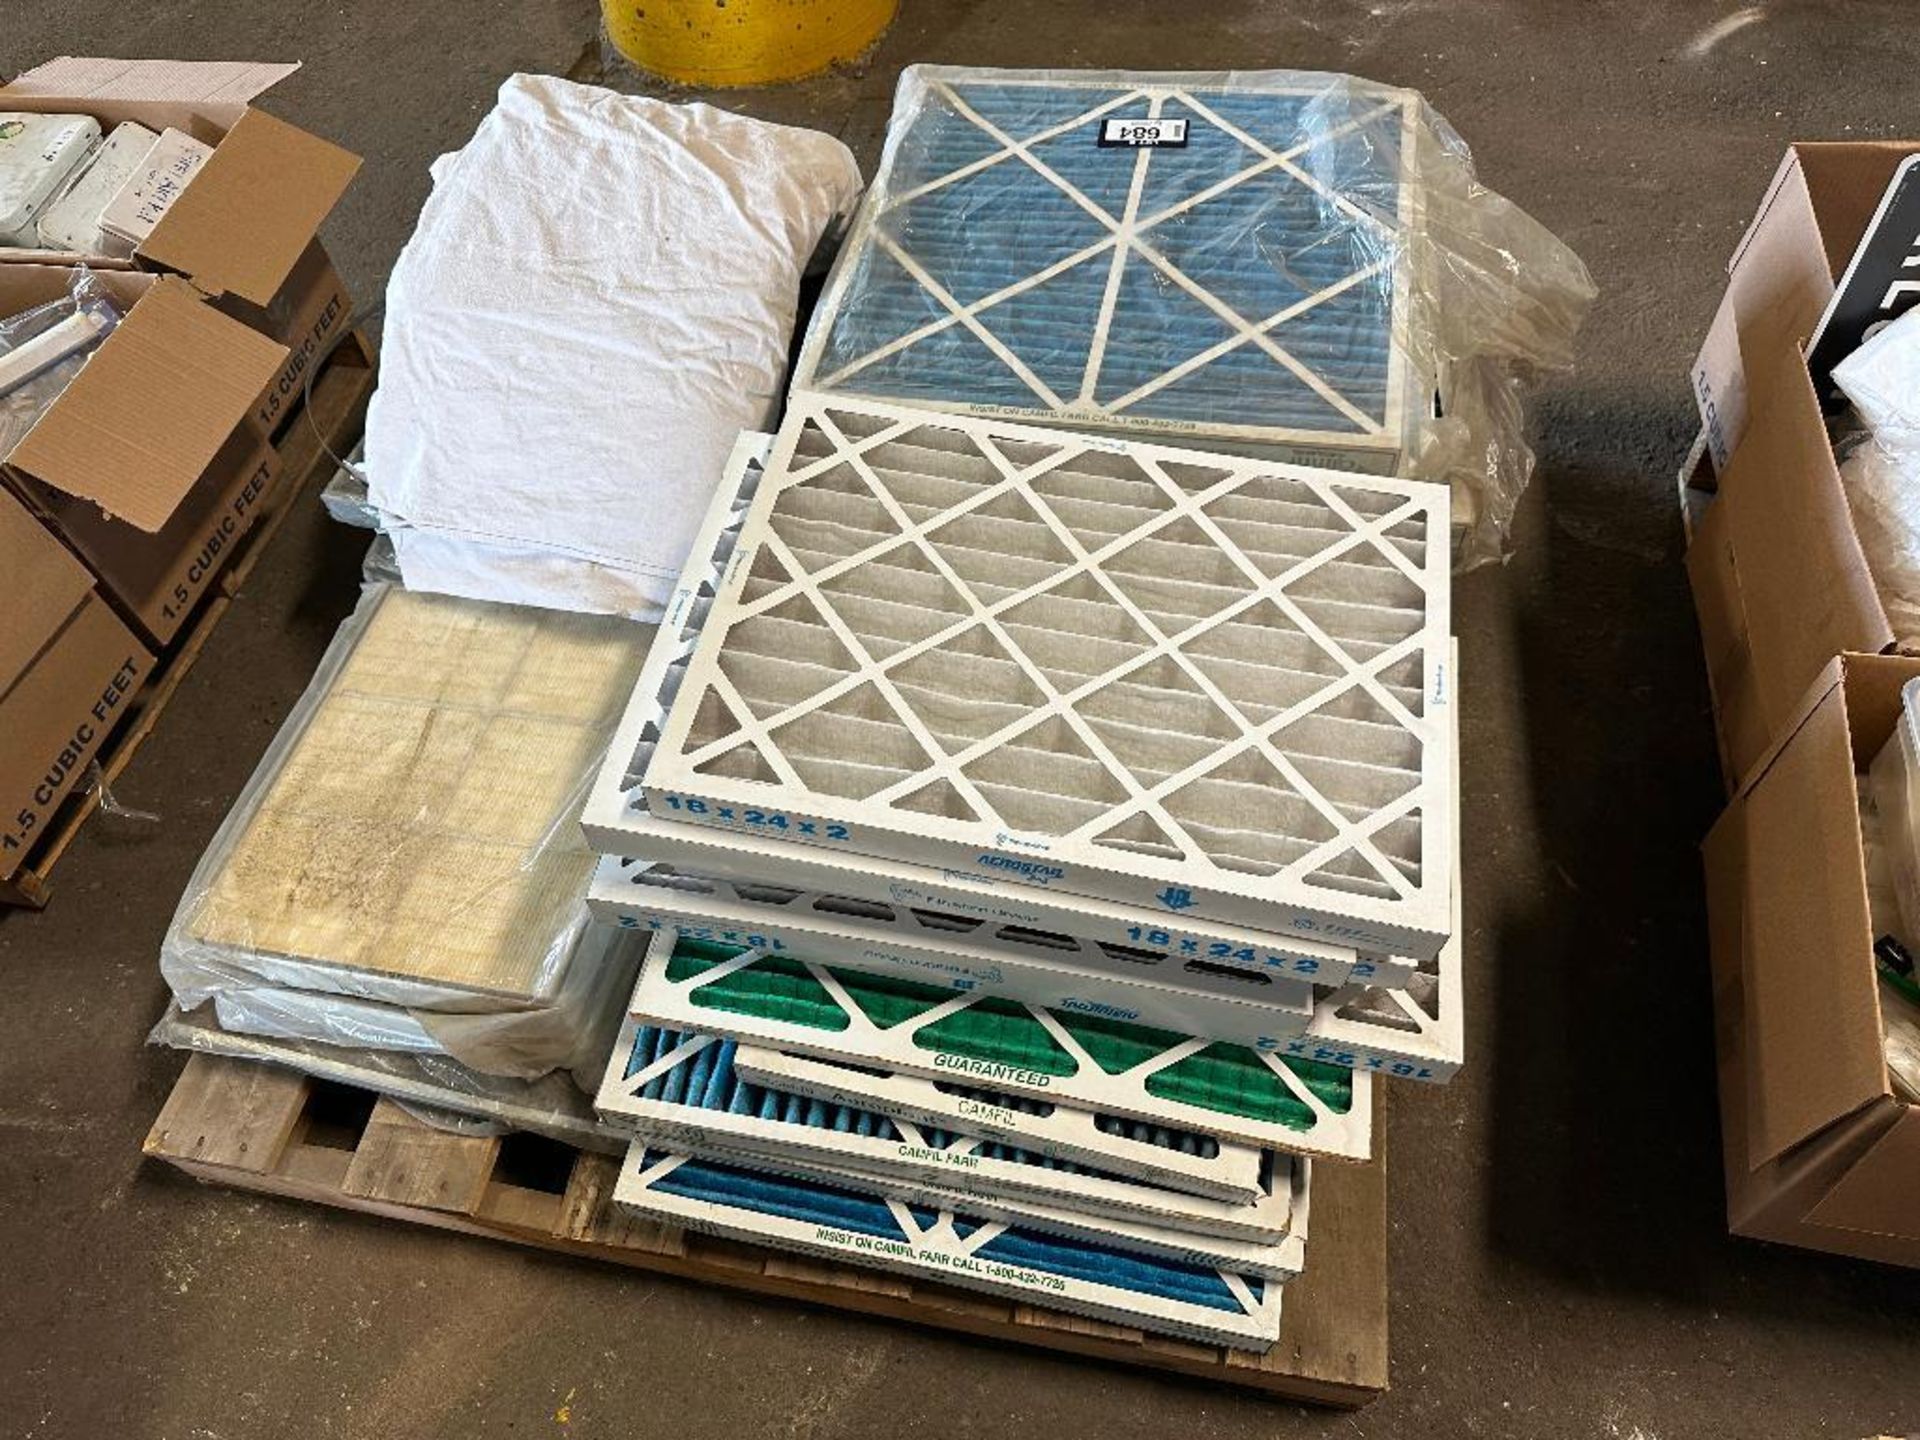 Lot of Asst. Air Filters and Hepa Filters - Image 3 of 3